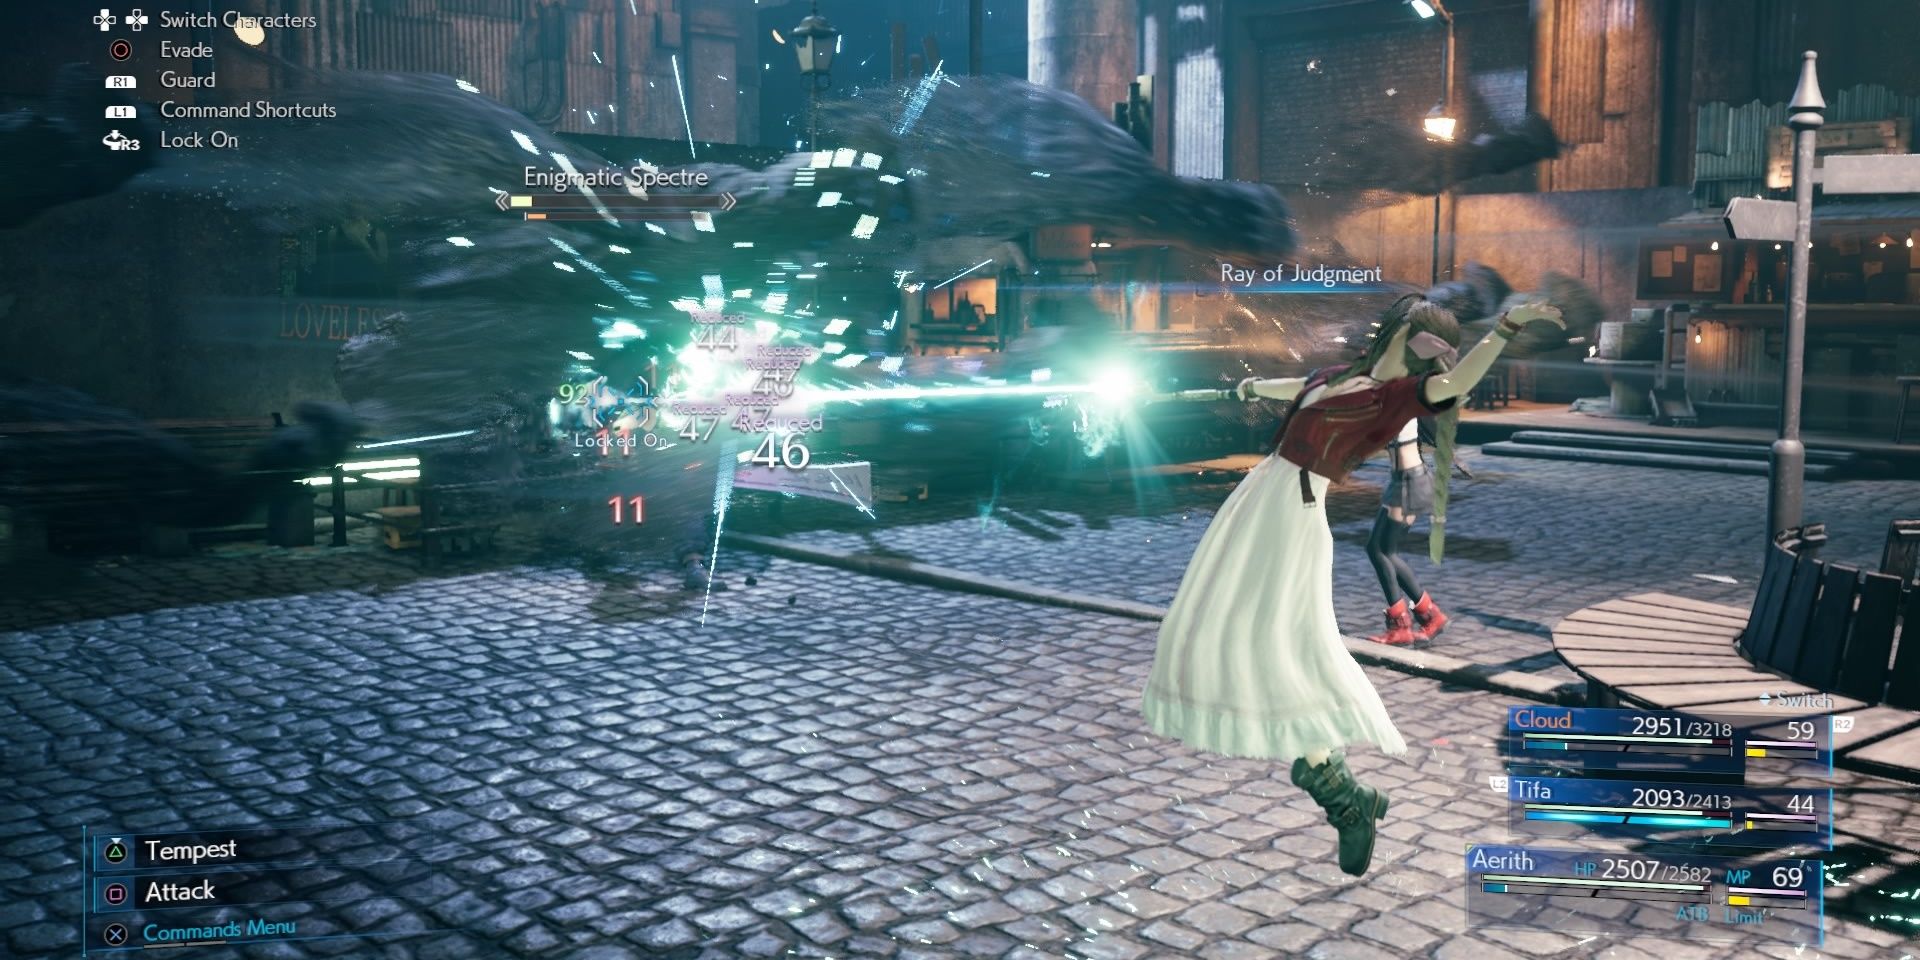 Aerith's Ray of Judgment from FFVII Remake